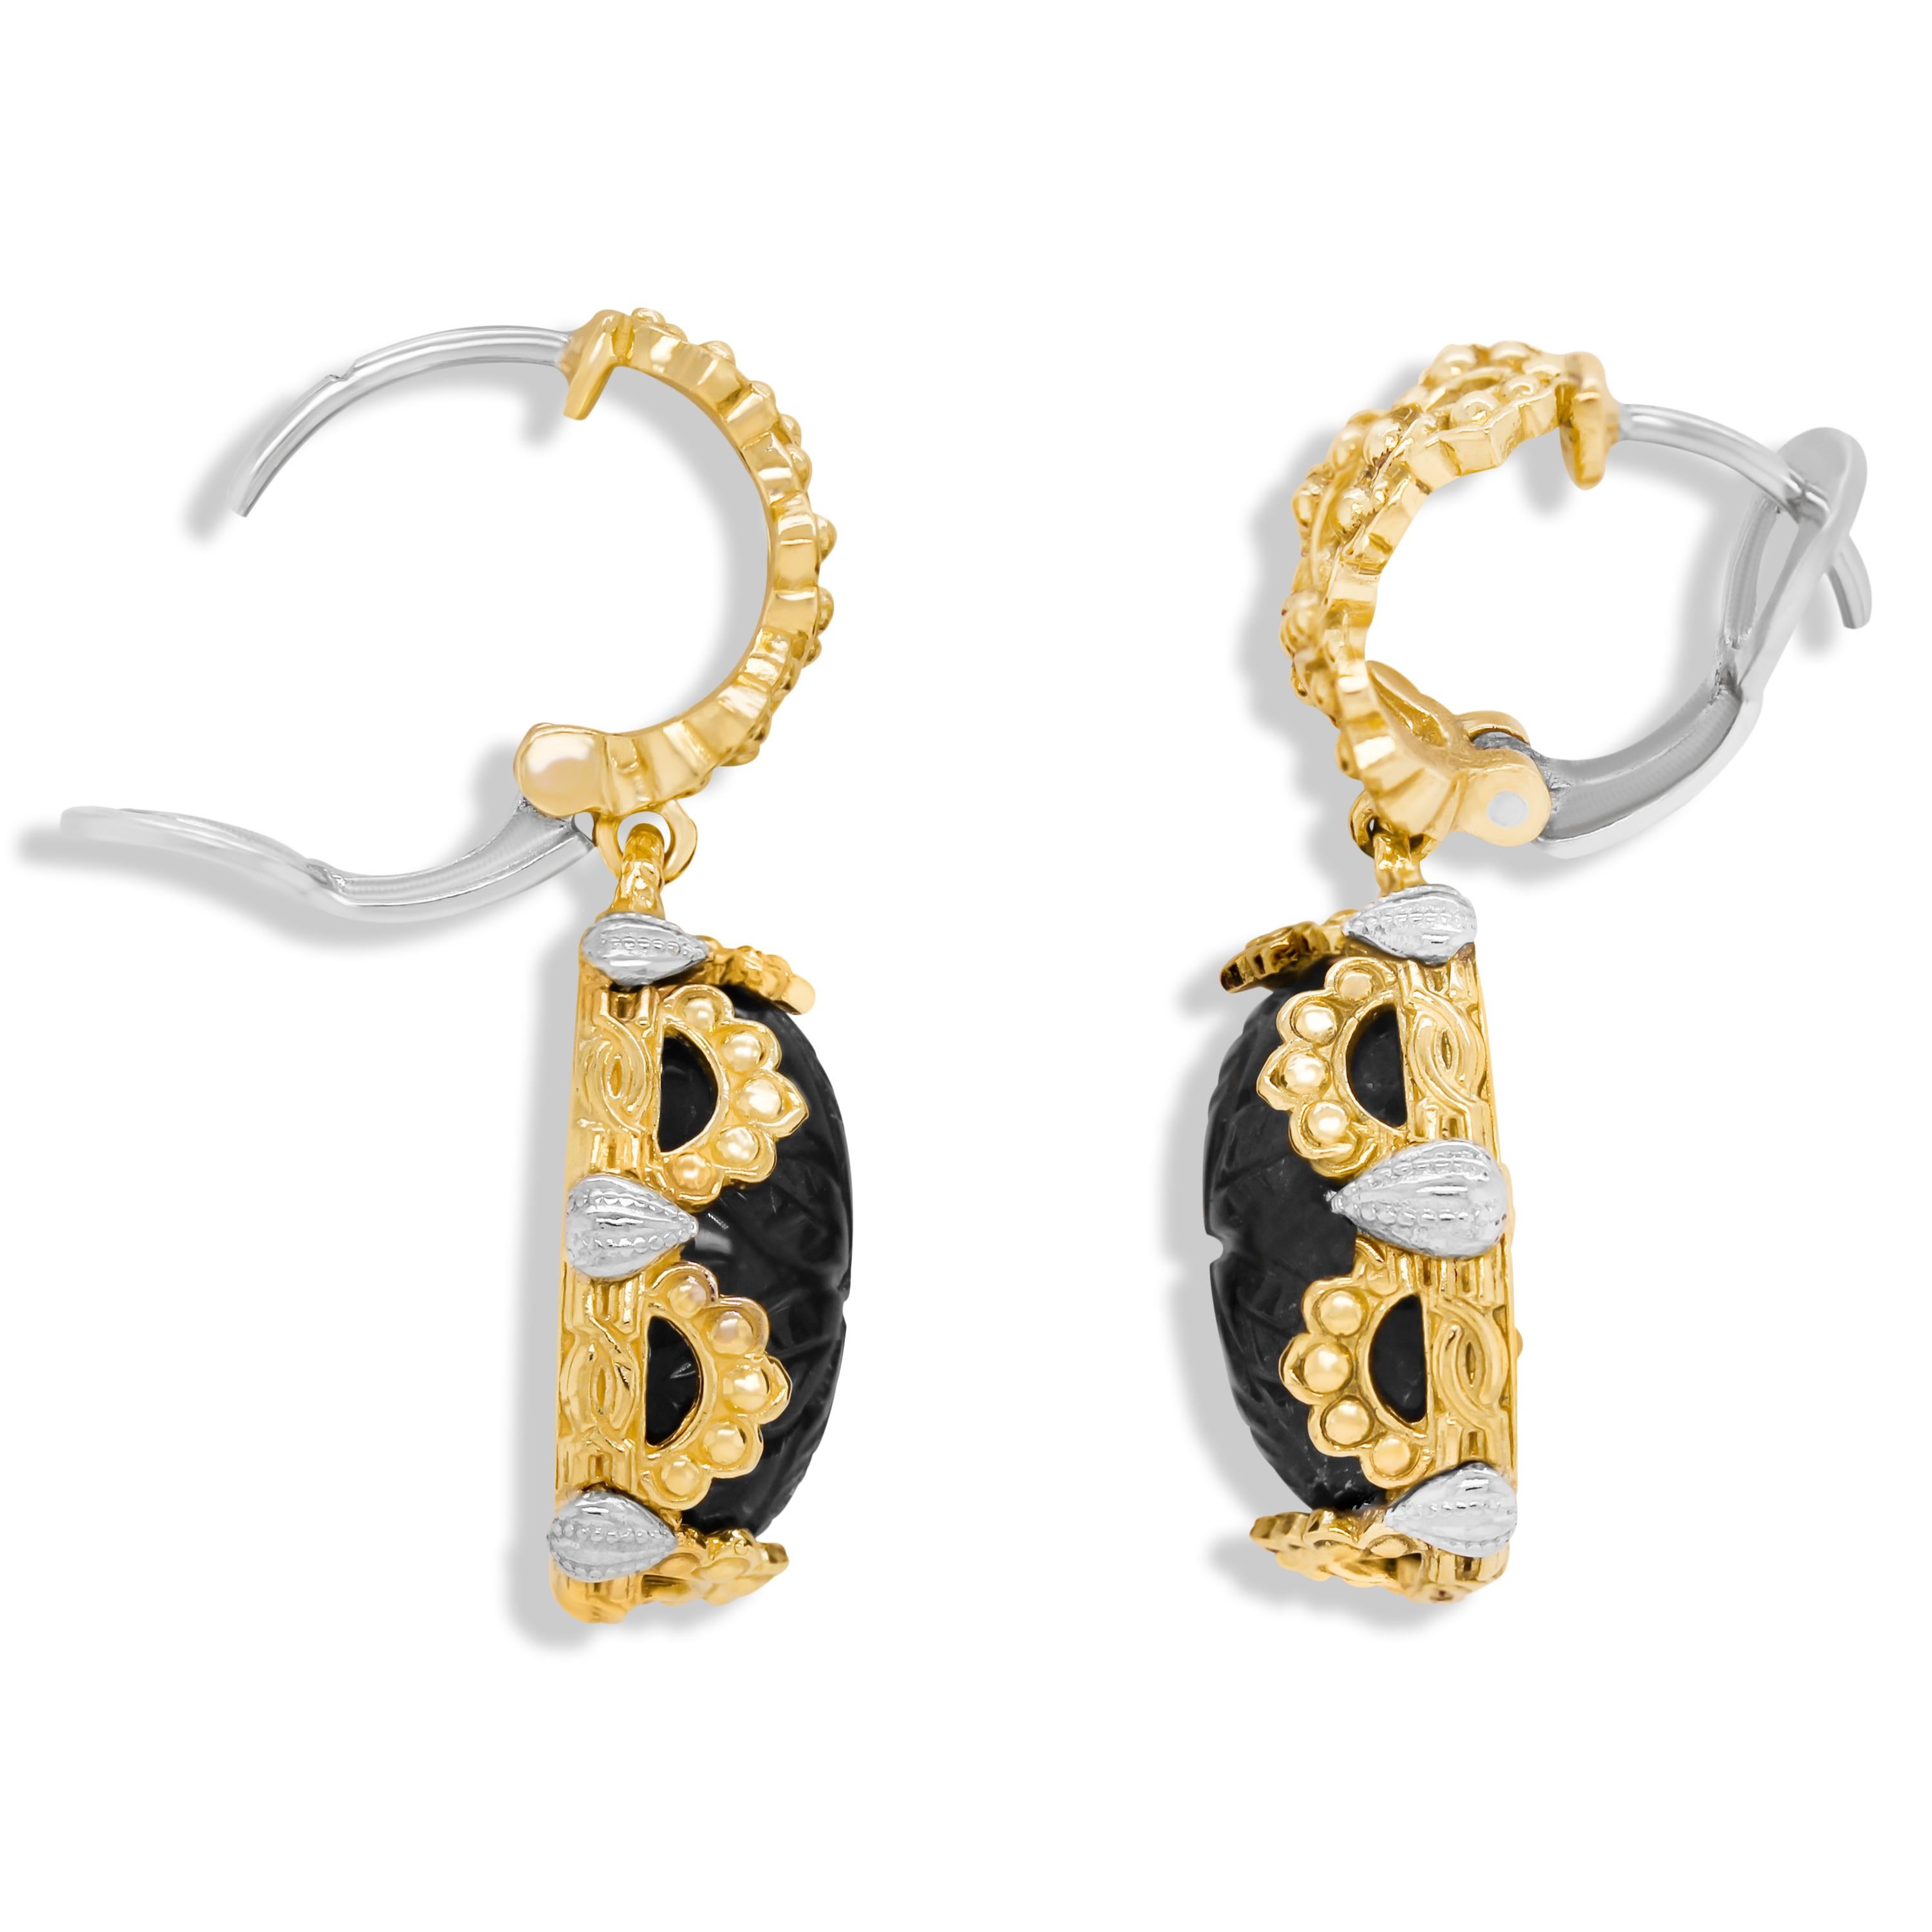 Stambolian 18K Two Tone Gold Floral Carved Labradorite Drop Earrings

This special pair of earrings feature two oval, floral-carved Labradorite centers

Earrings measure 1.20 inch in length by 0.53 inch width

French backs used and allow the